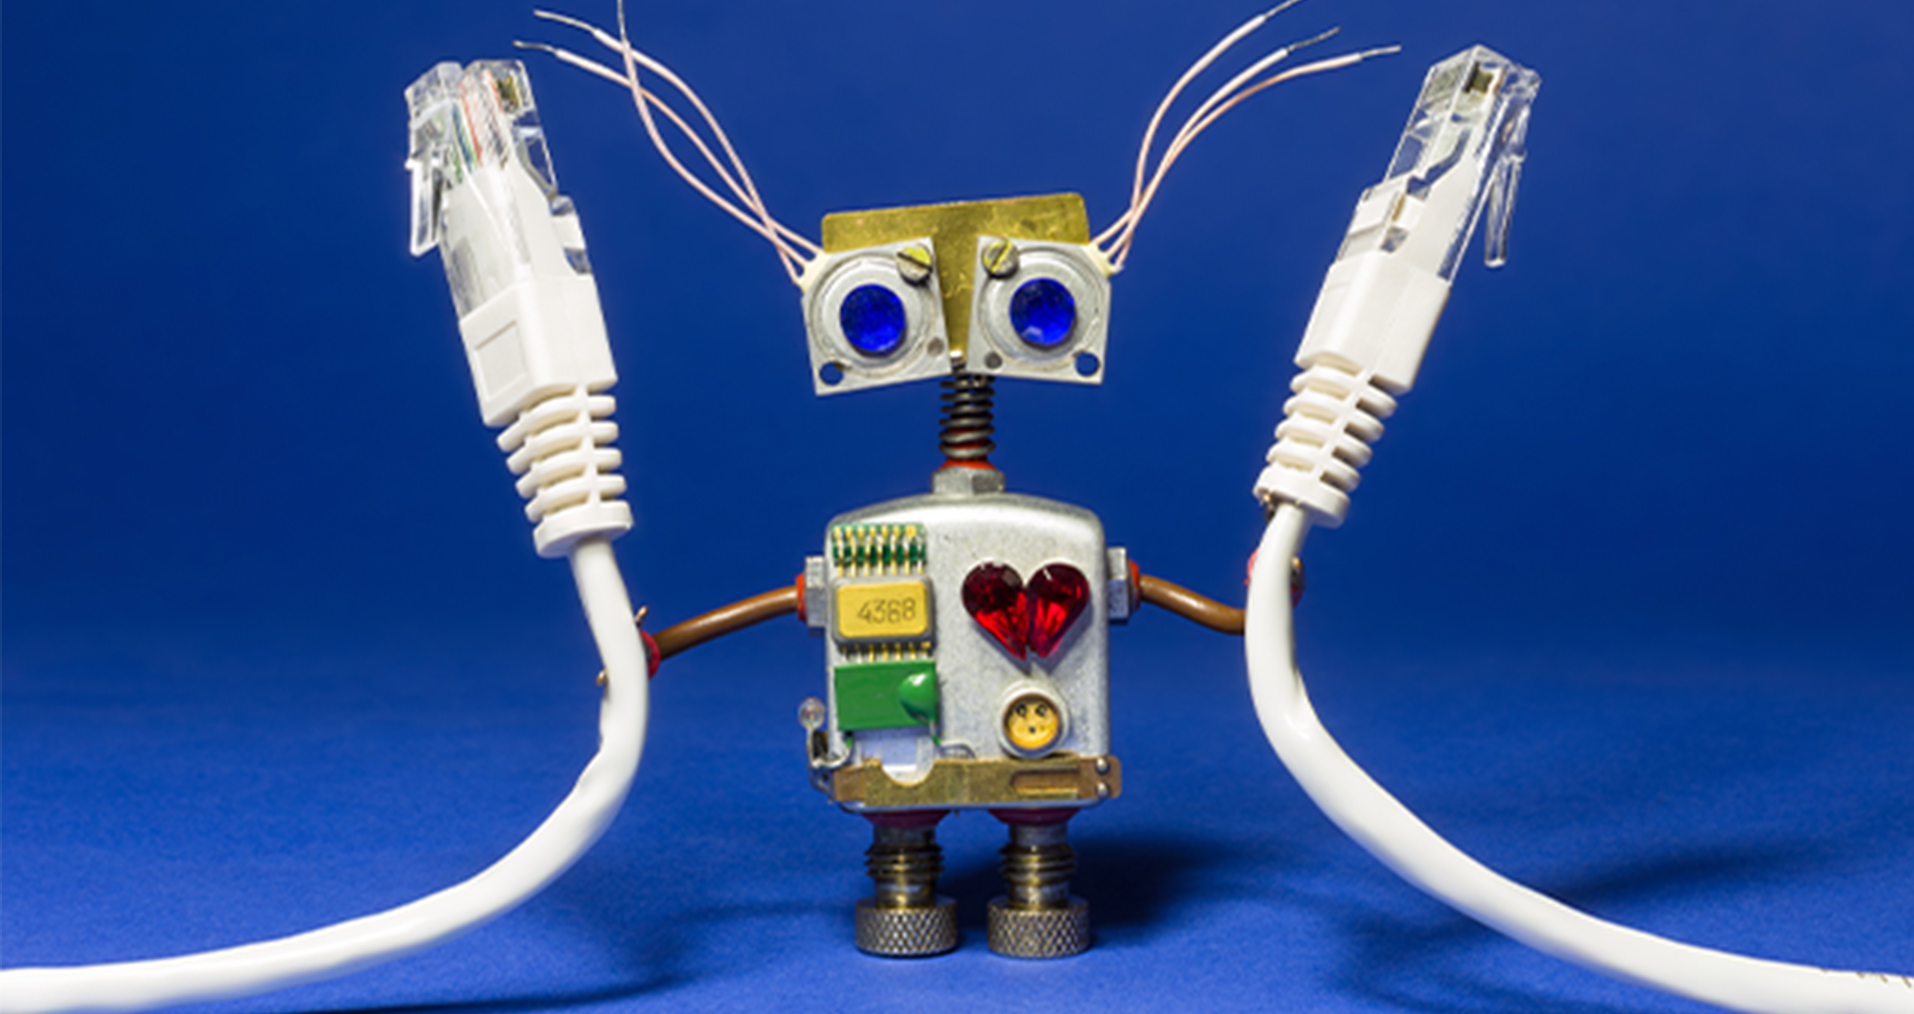 A little robot holding two network cables